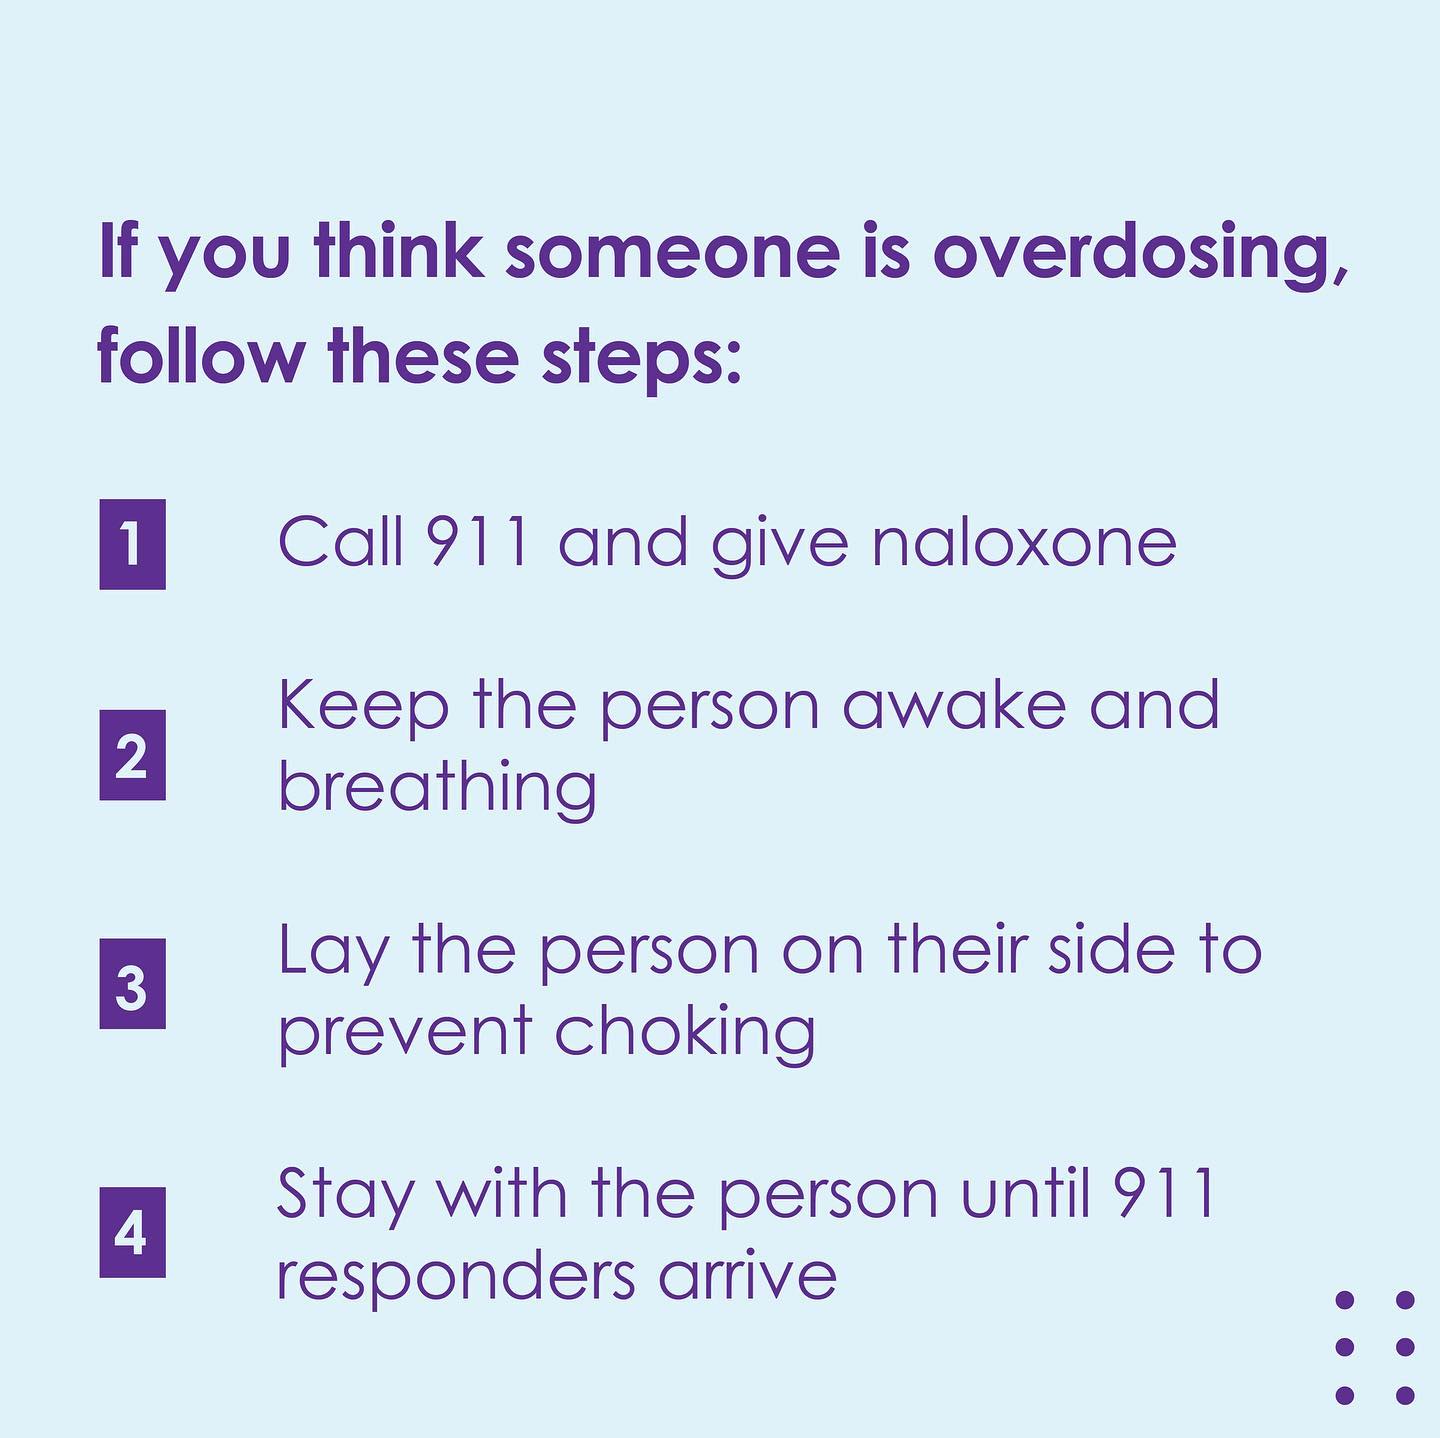 Social Media picture: Four steps to follow if you think someone is overdosing